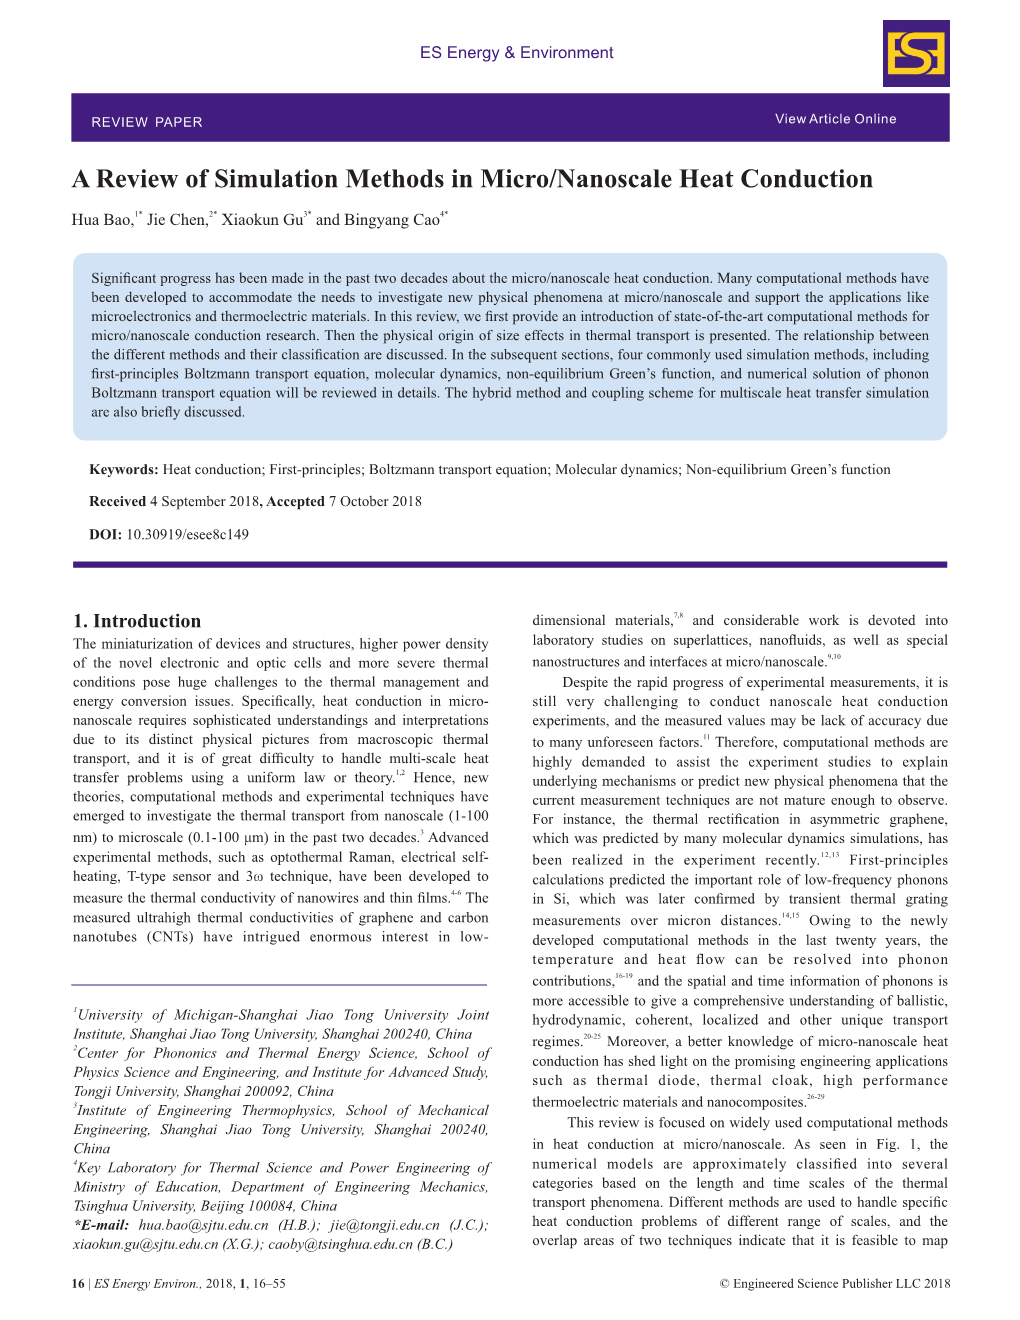 A Review of Simulation Methods in Micro/Nanoscale Heat Conduction